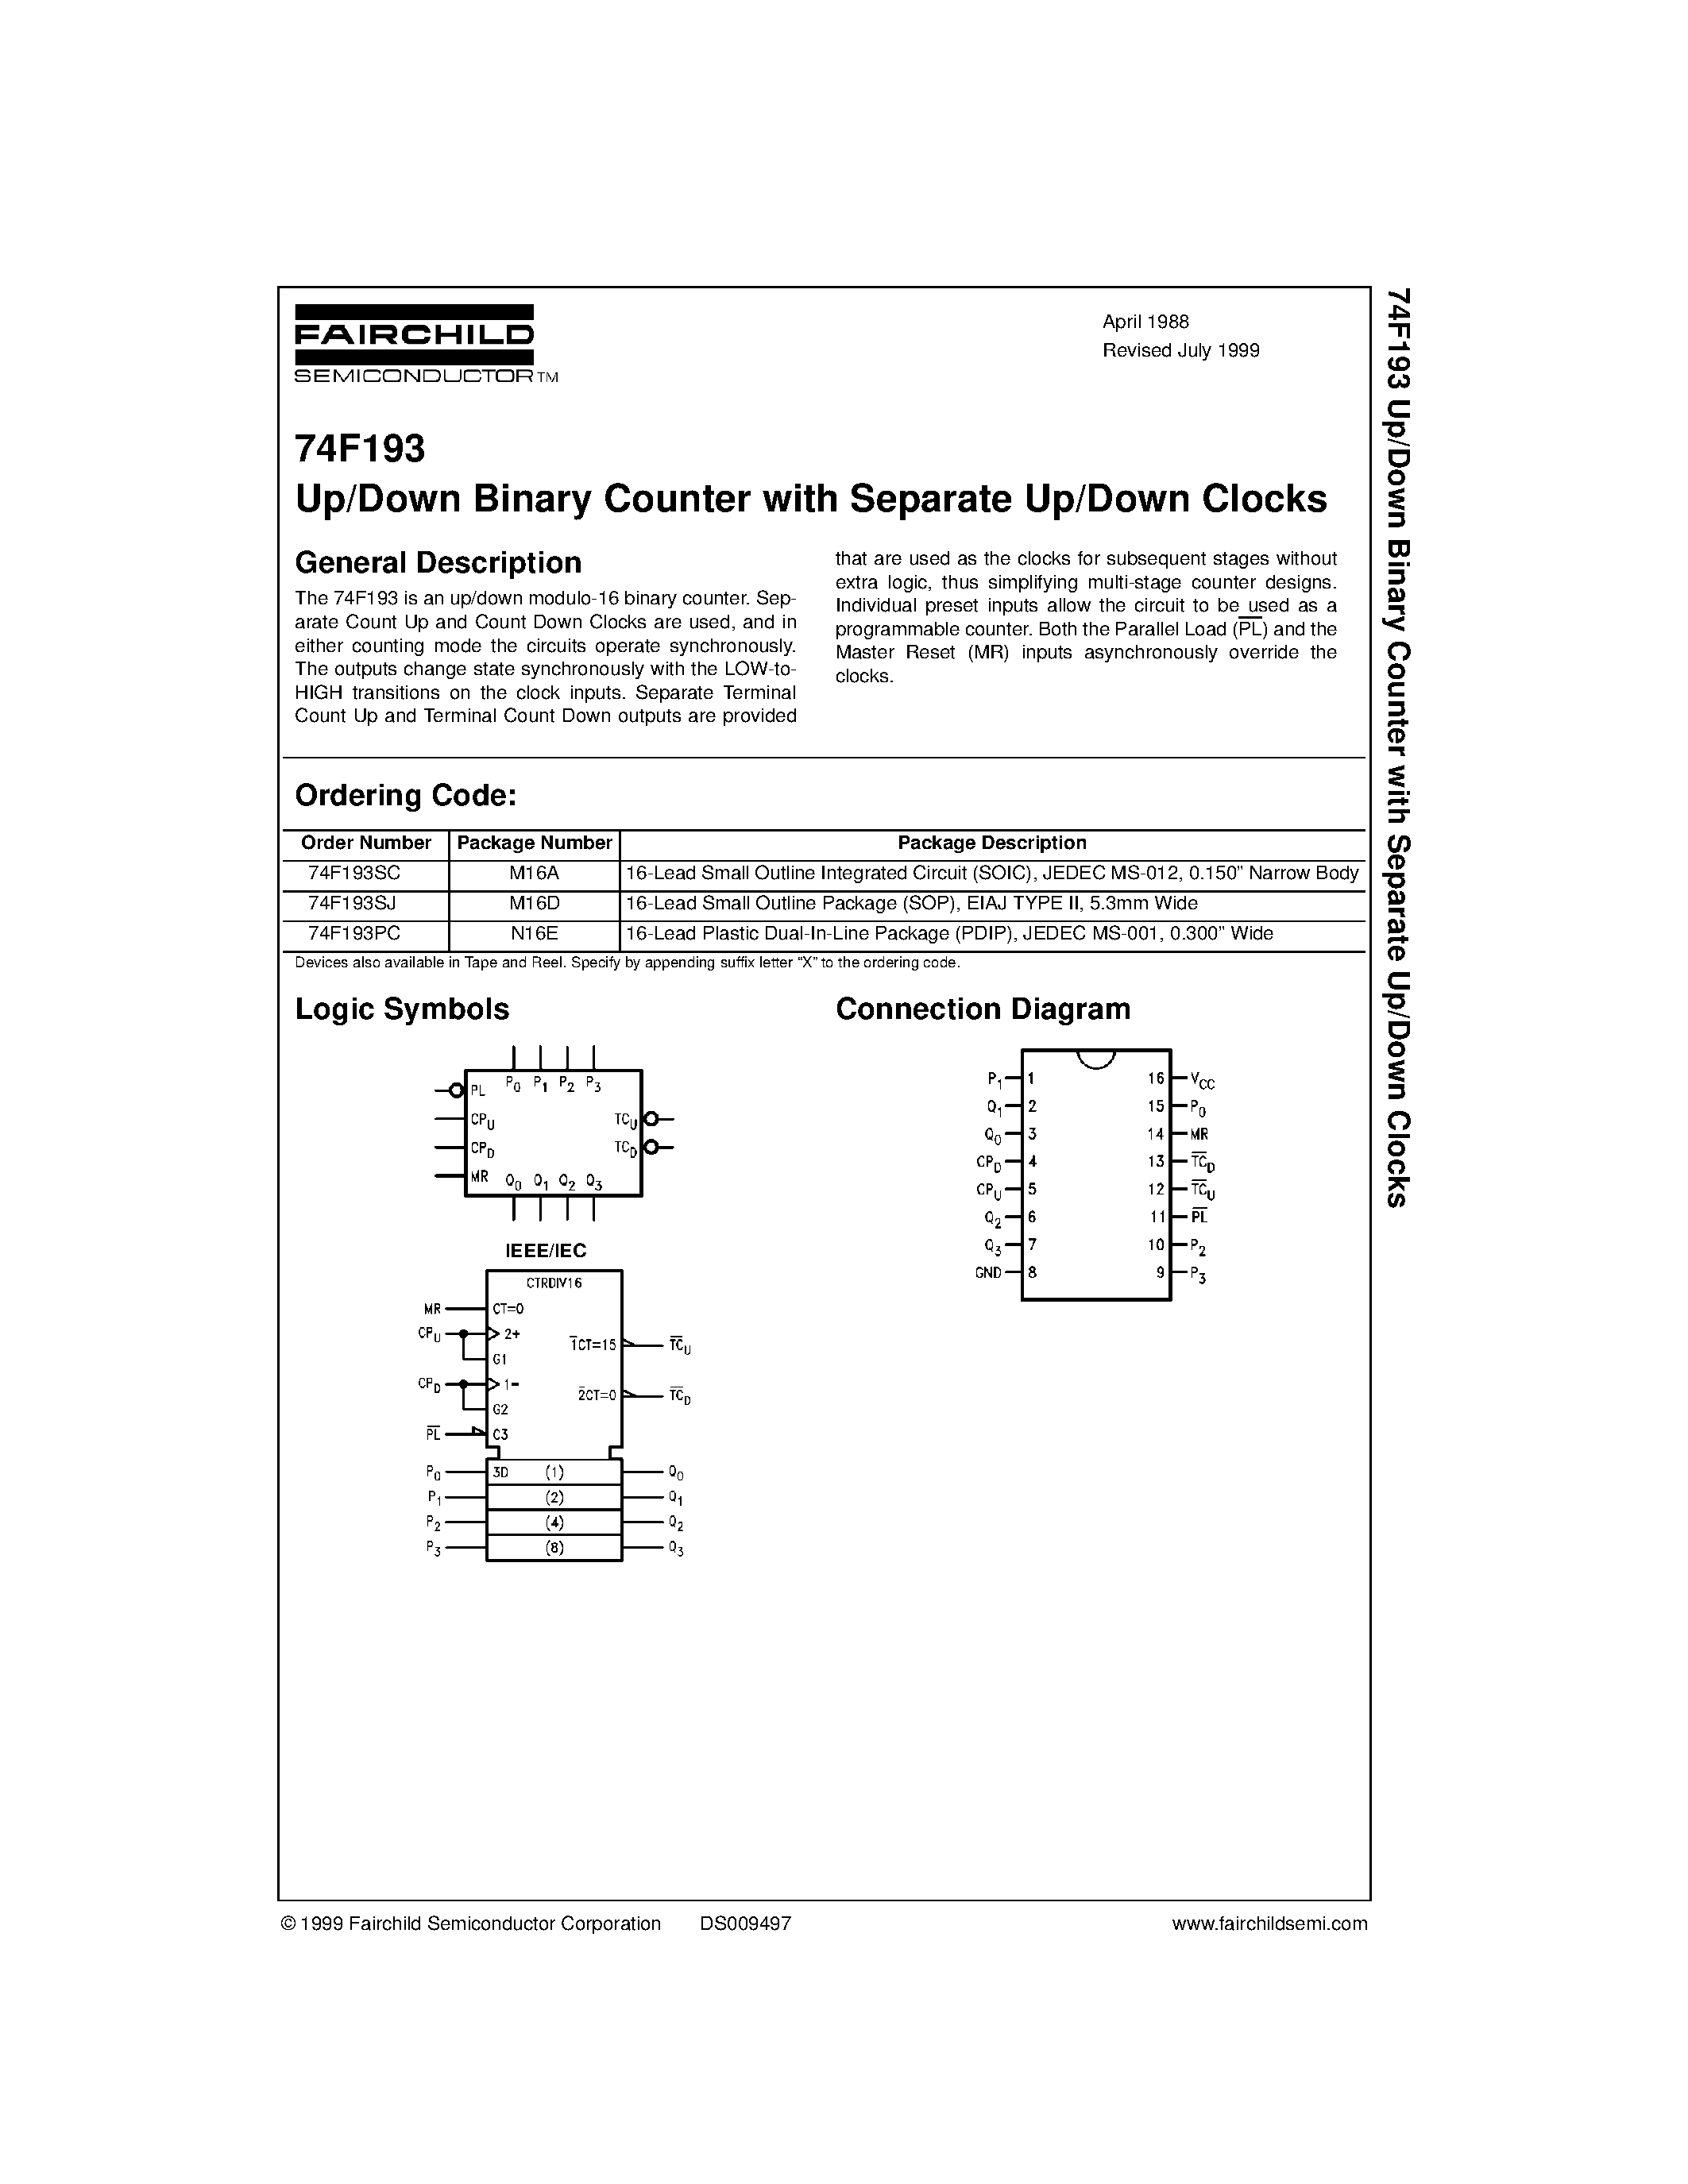 Datasheet 74F193 - Up/Down Binary Counter with Separate Up/Down Clocks page 1